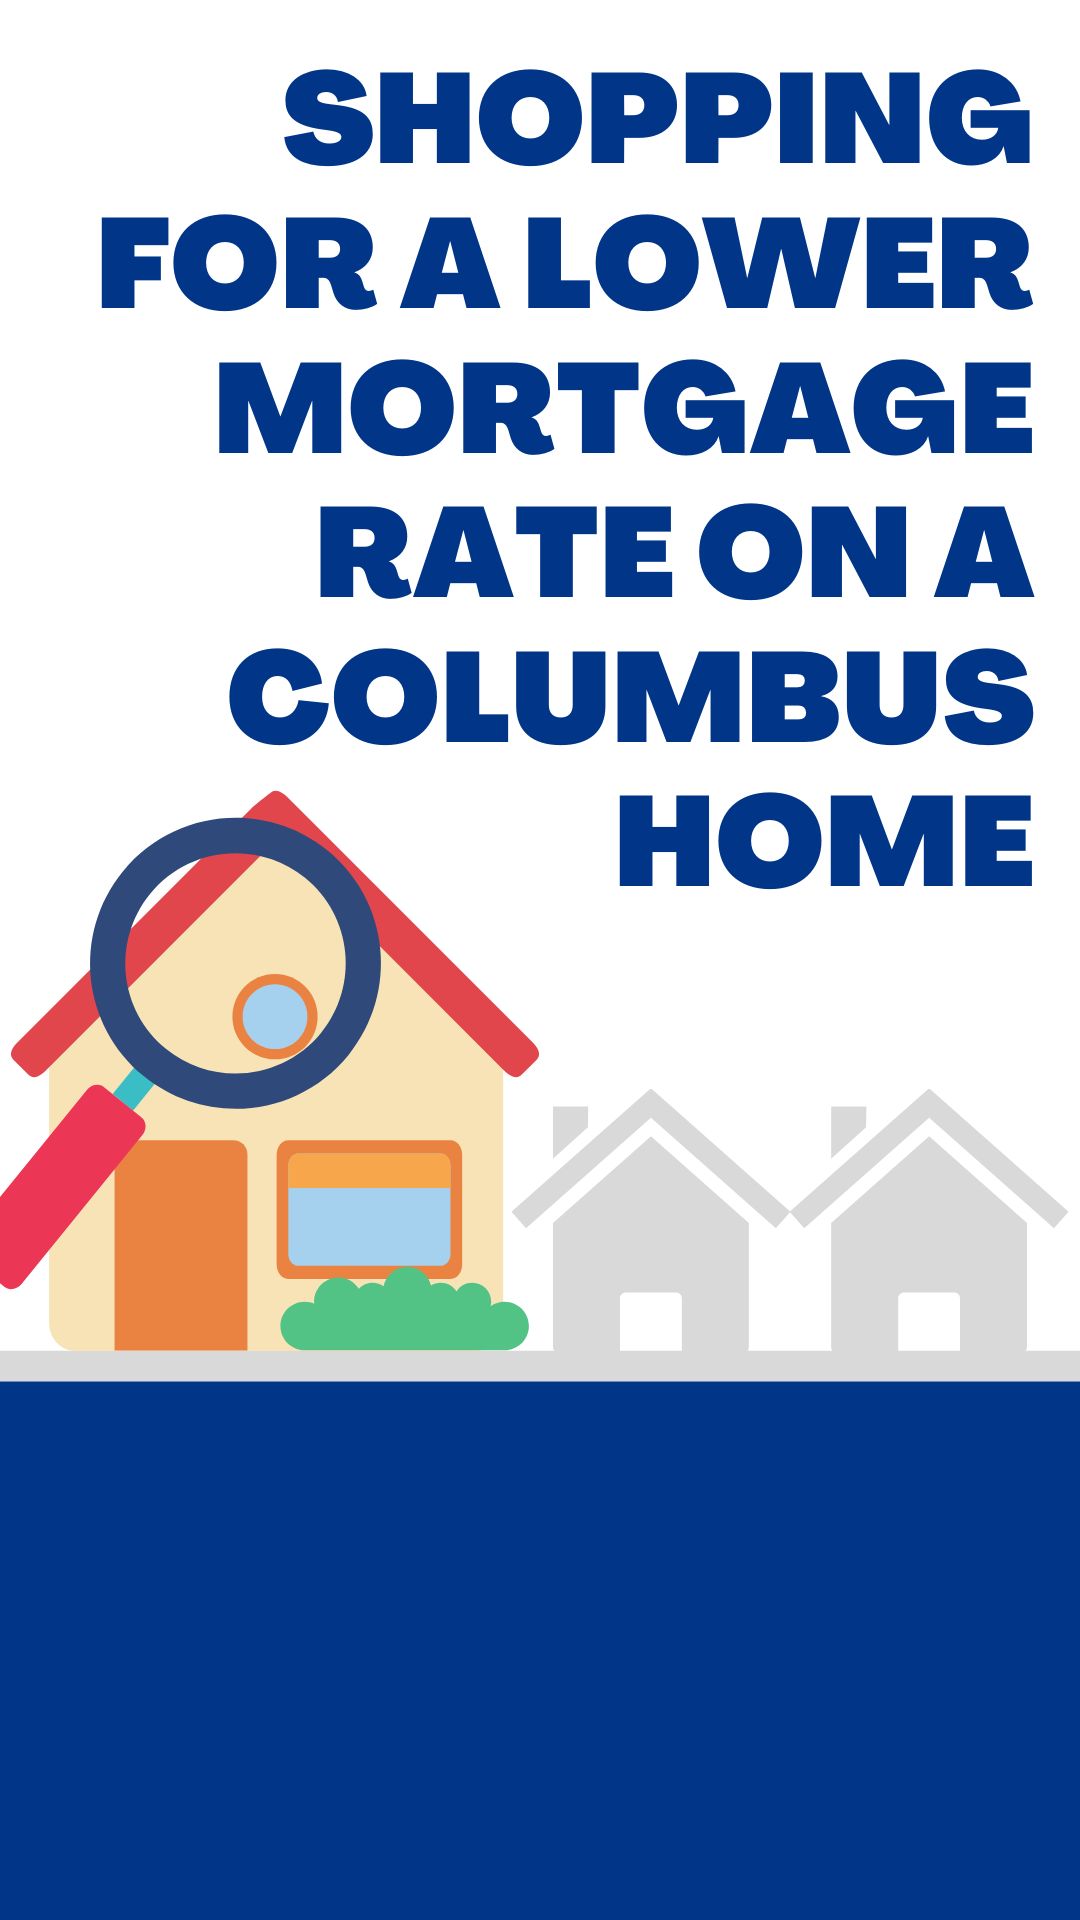 Shopping for a Lower Mortgage Rate on a Columbus Home